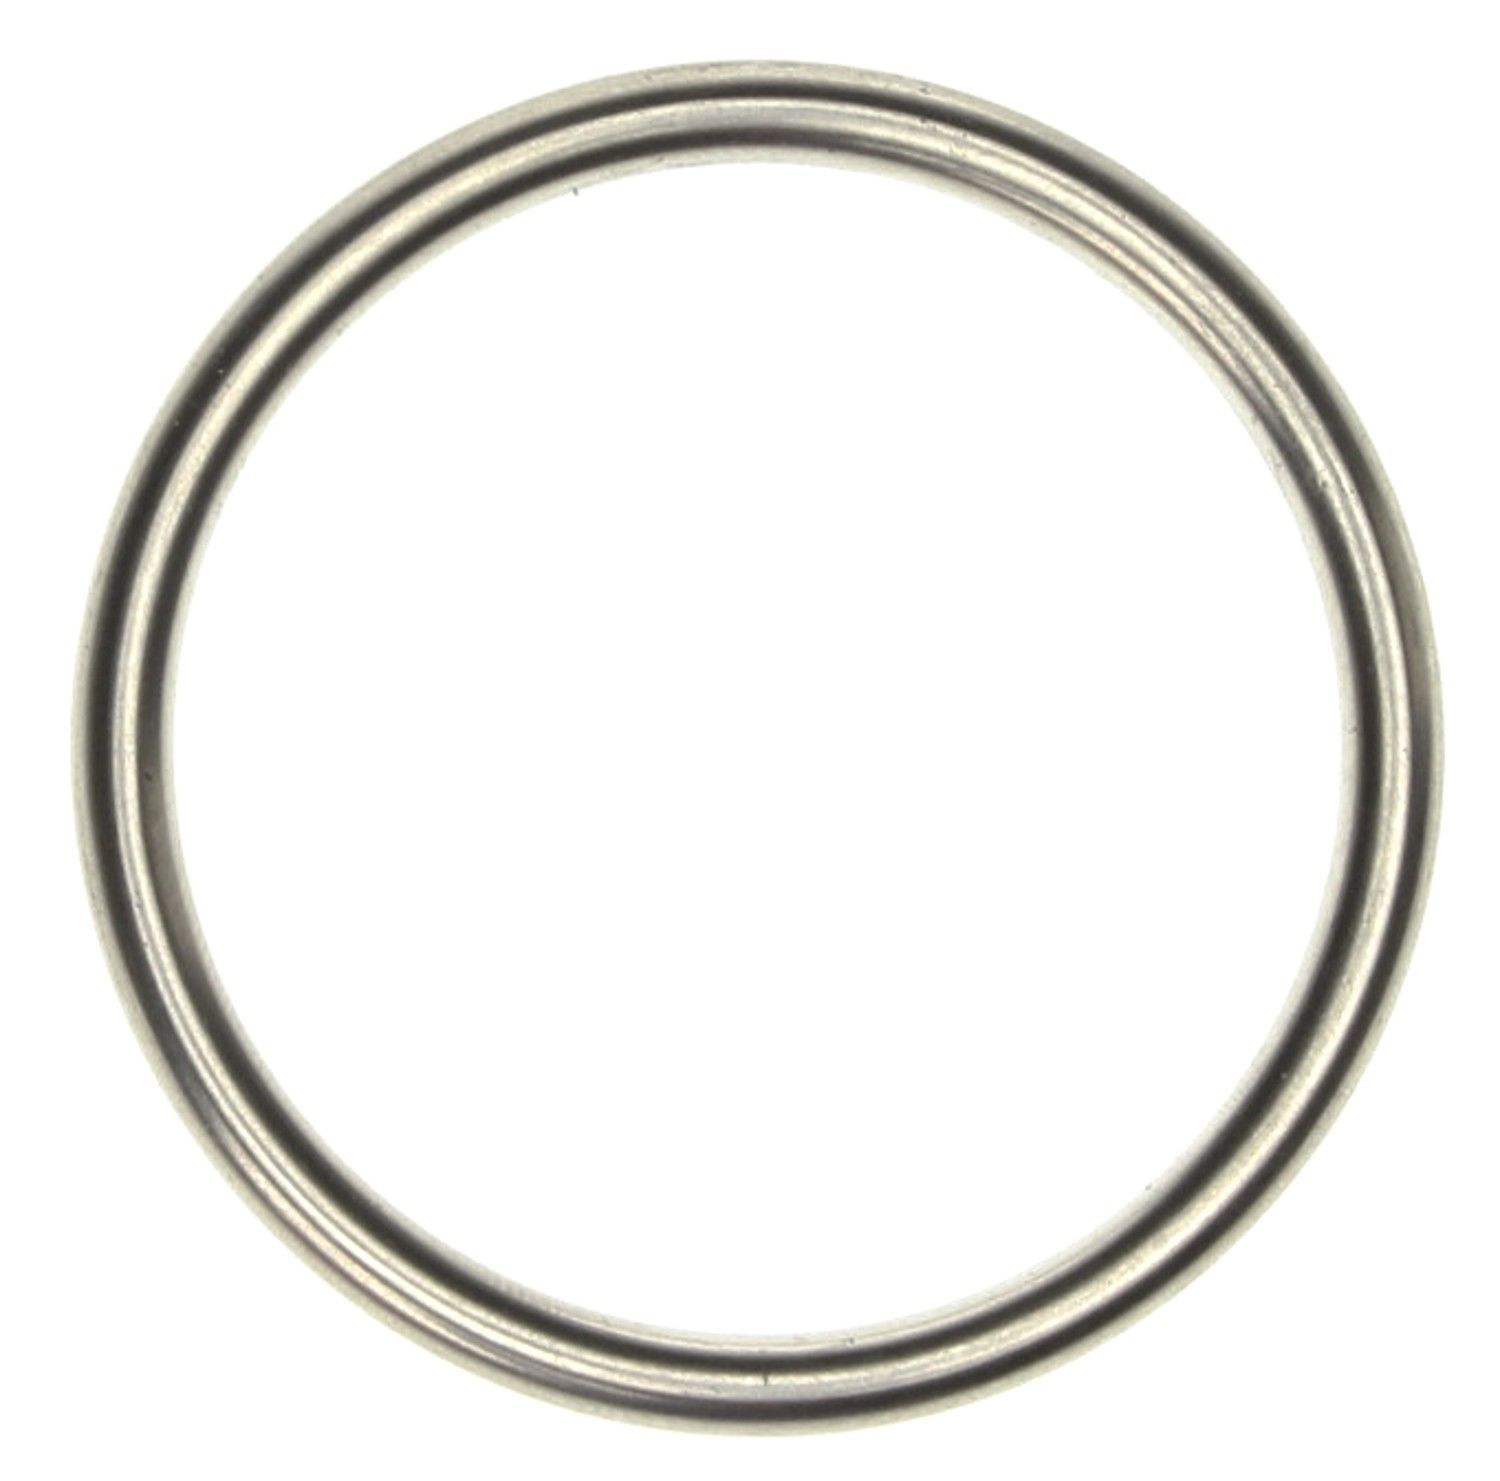 MAHLE ORIGINAL - Exhaust Pipe Flange Gasket - MHL F7281